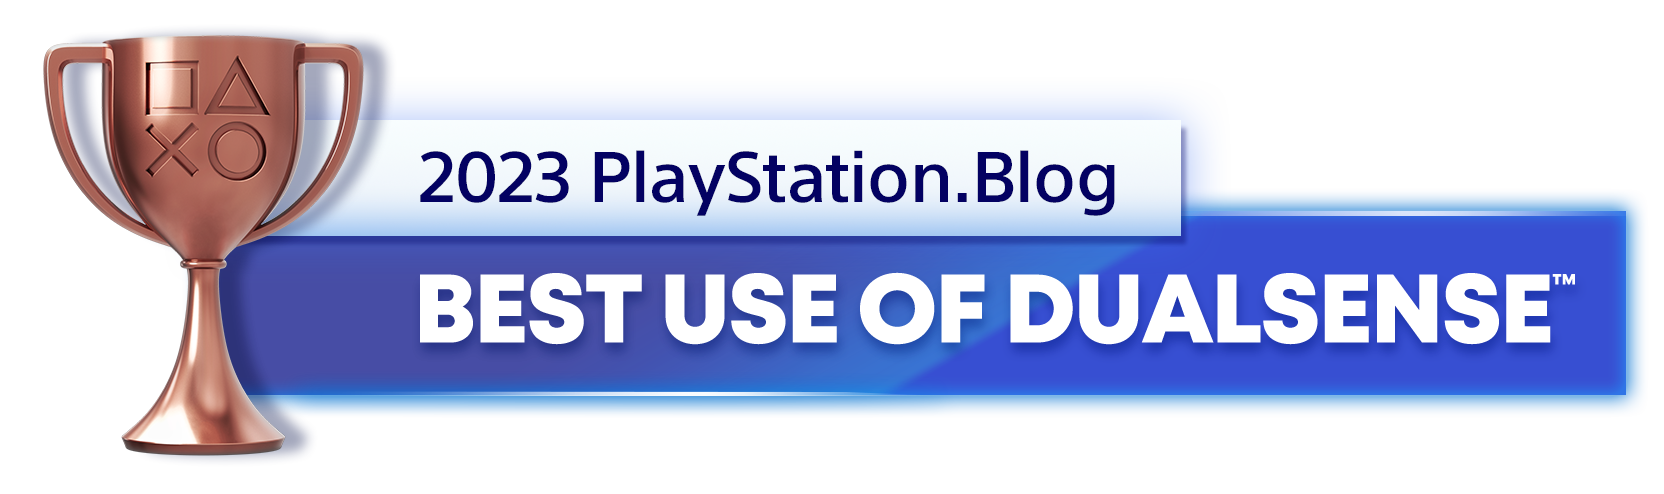  "Bronze Trophy for the 2023 PlayStation Blog Best Use of DualSense Controller Winner"